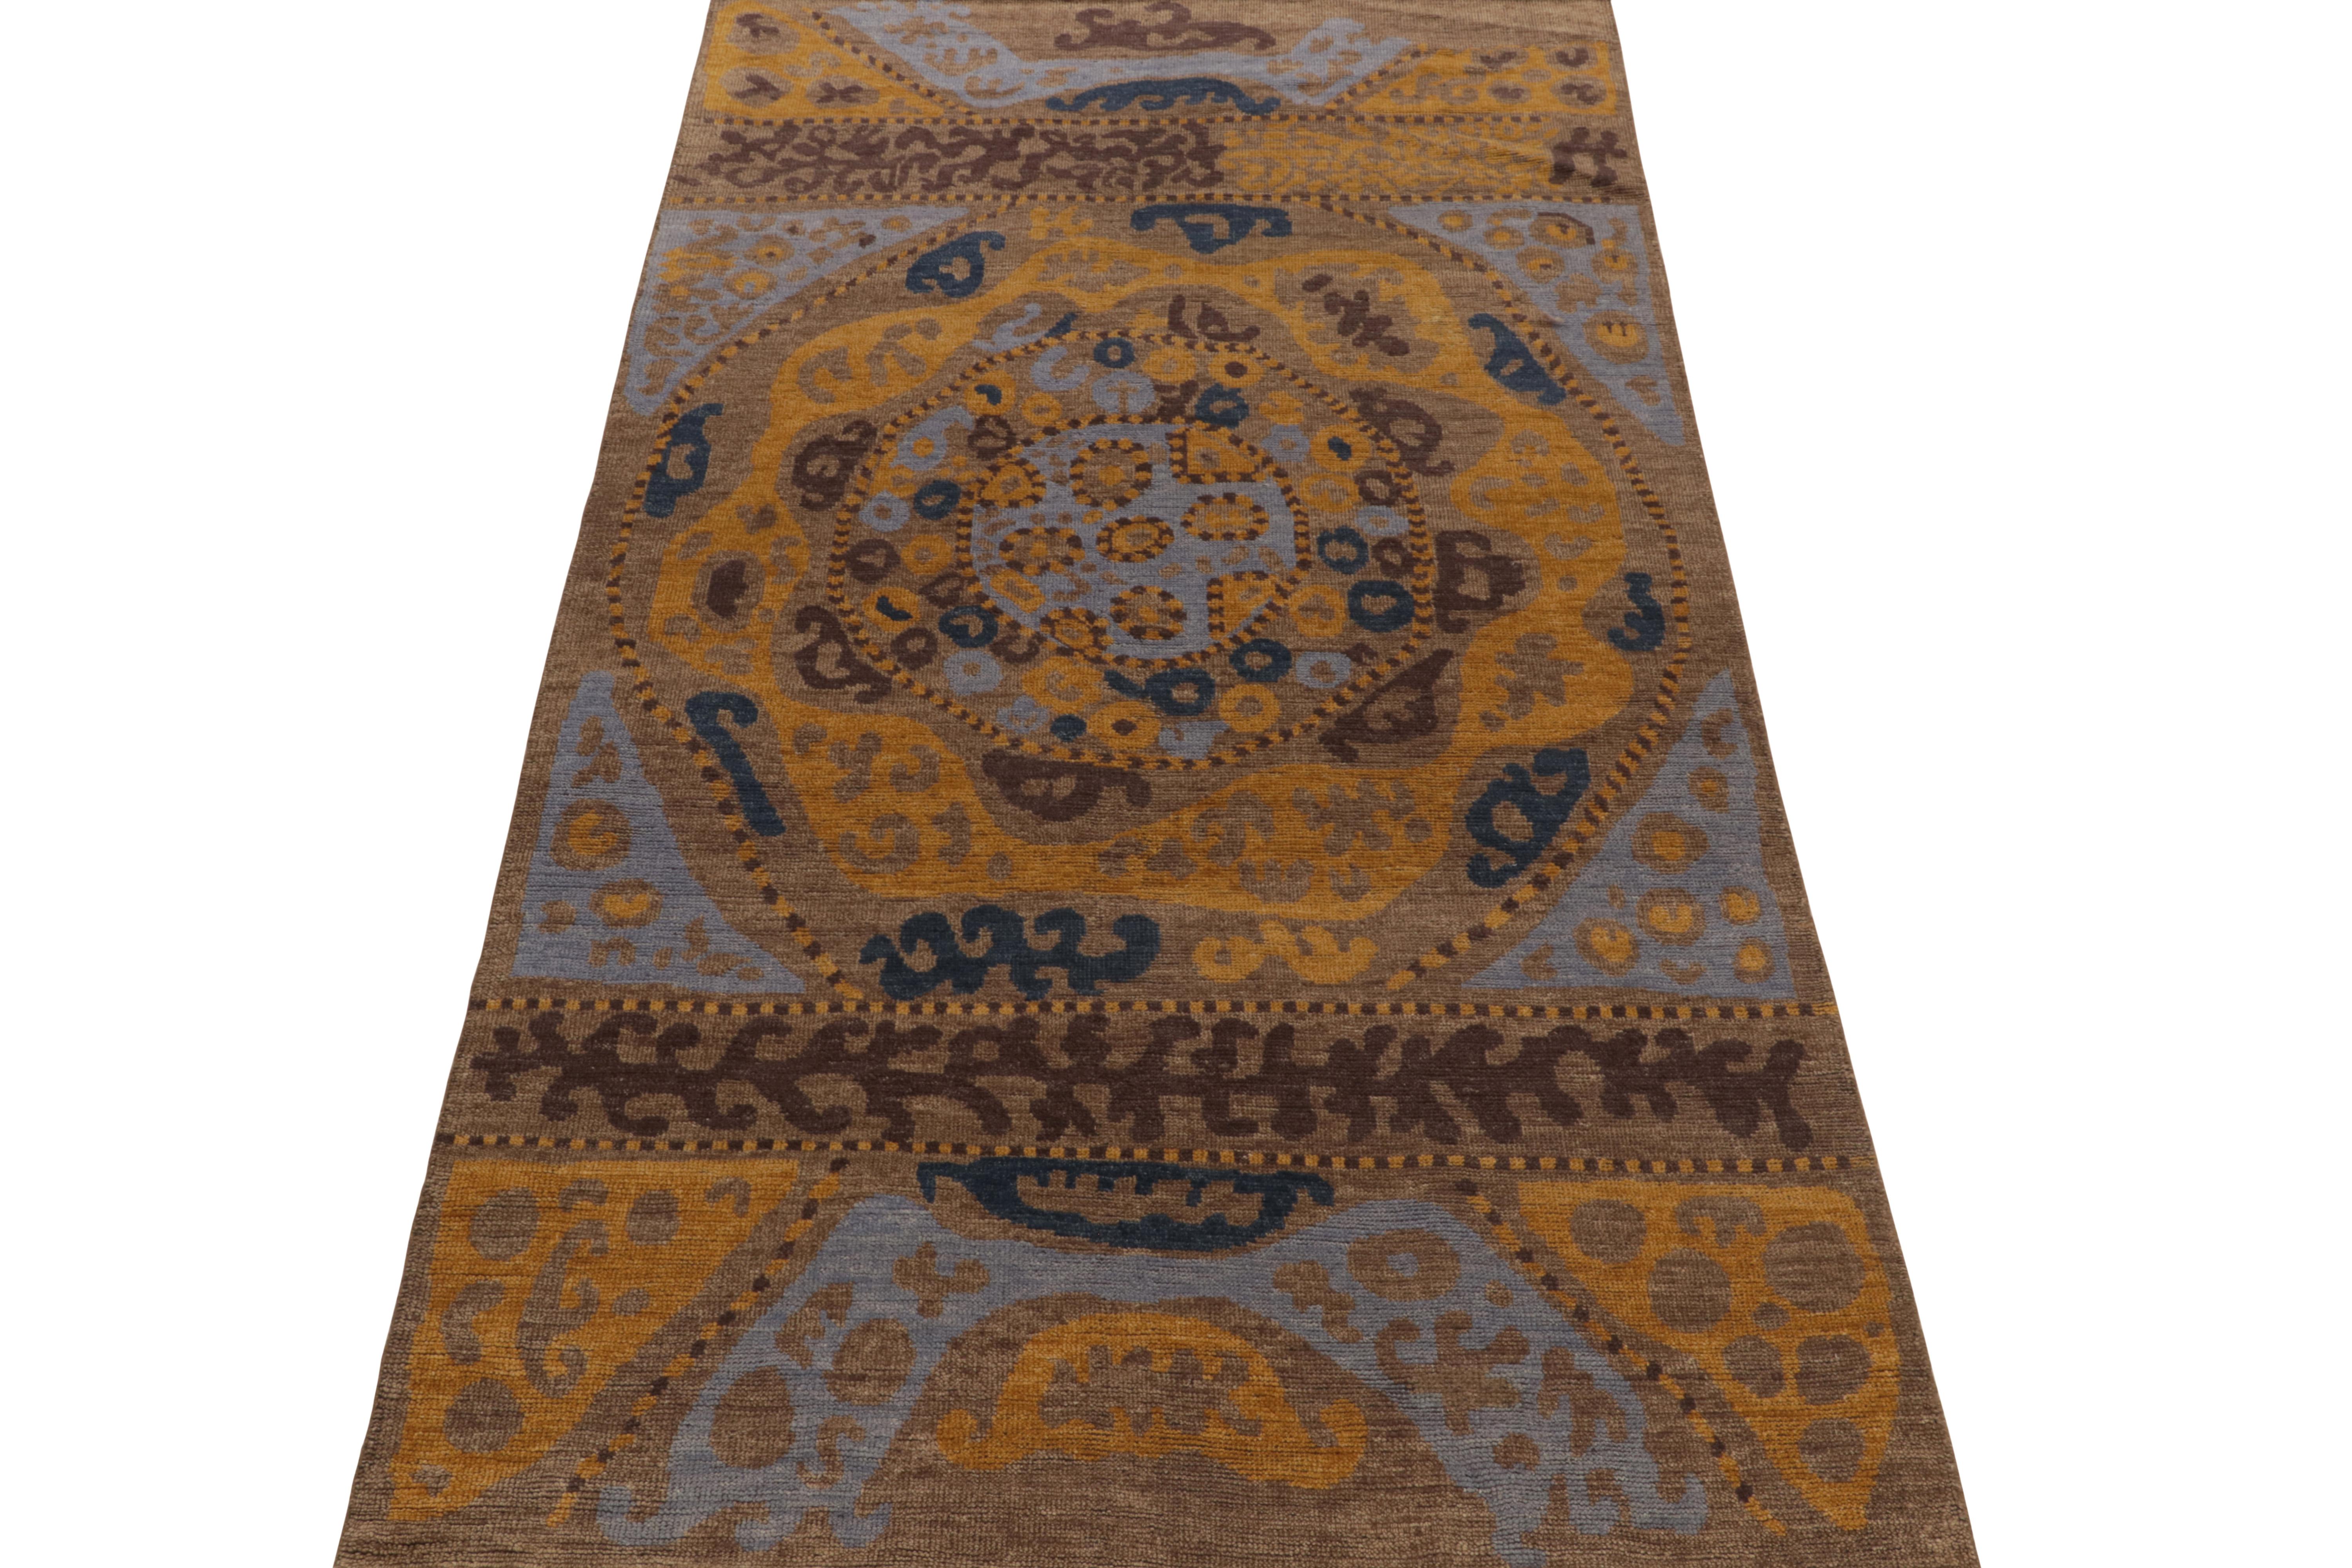 Indian Rug & Kilim’s Tribal style rug in Beige-Brown, Gold and Blue Patterns For Sale